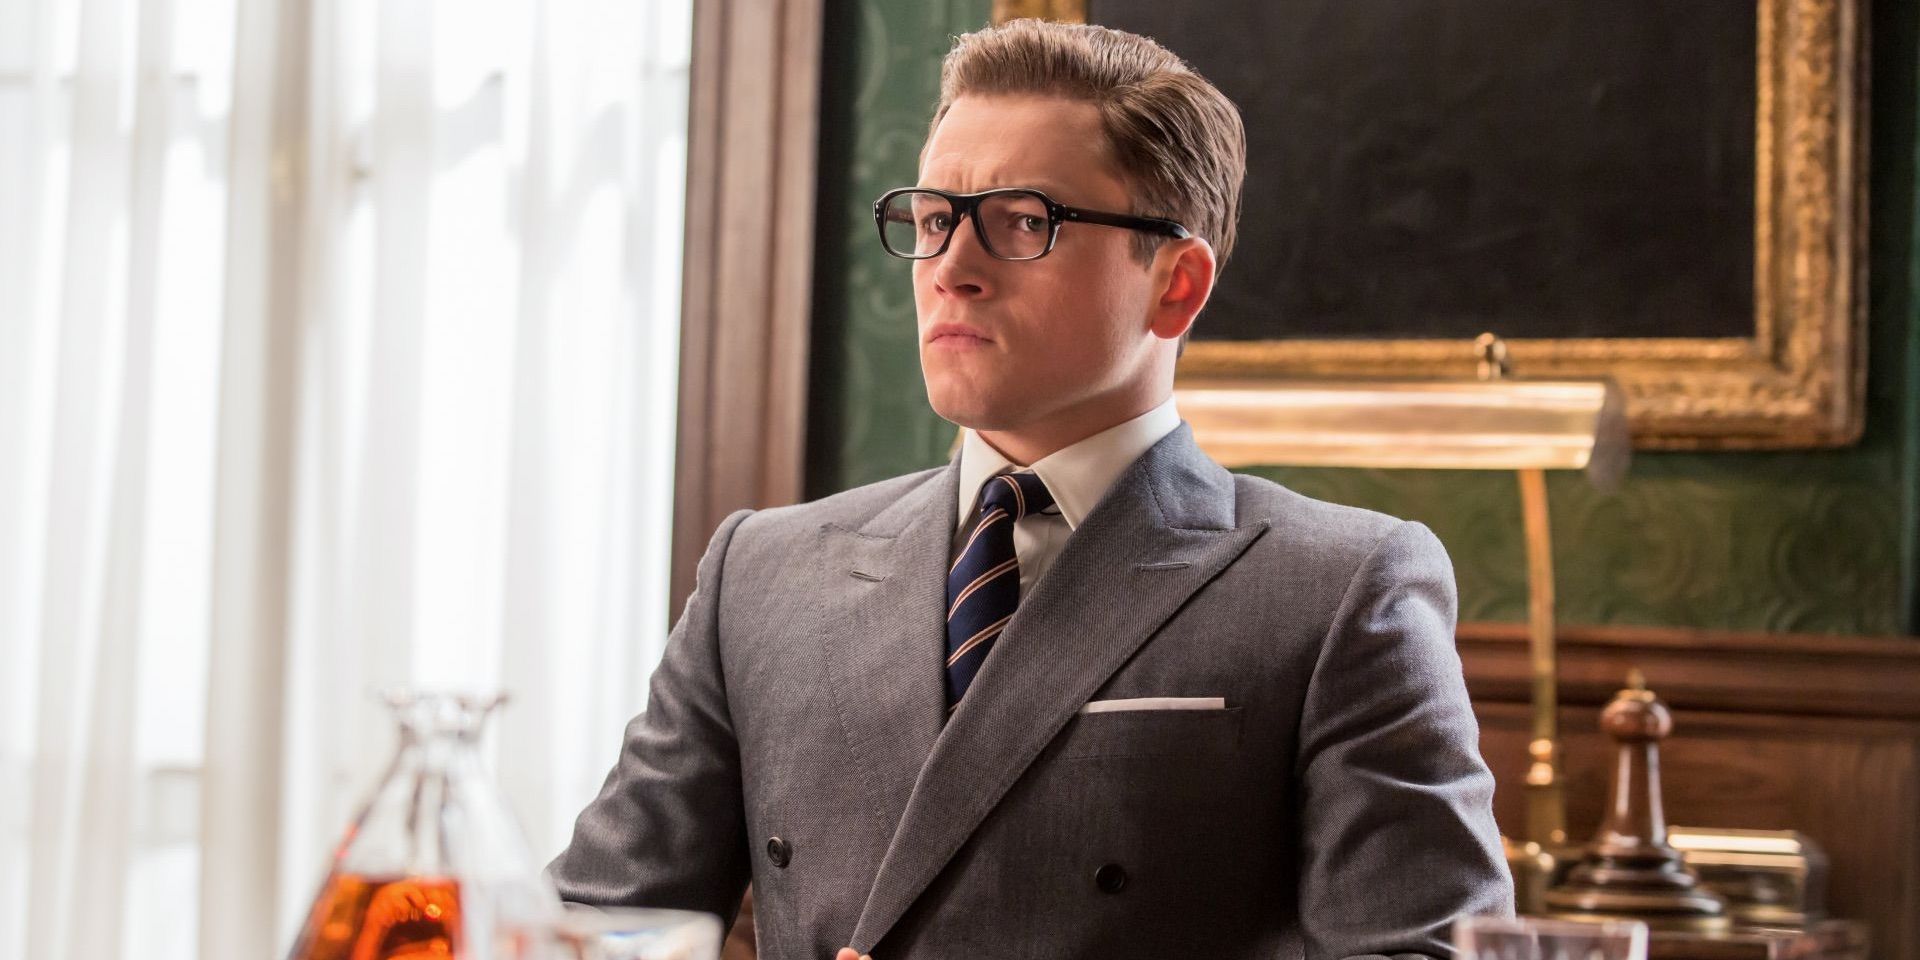 Michael Caine Undergoes Transformation in Kingsman